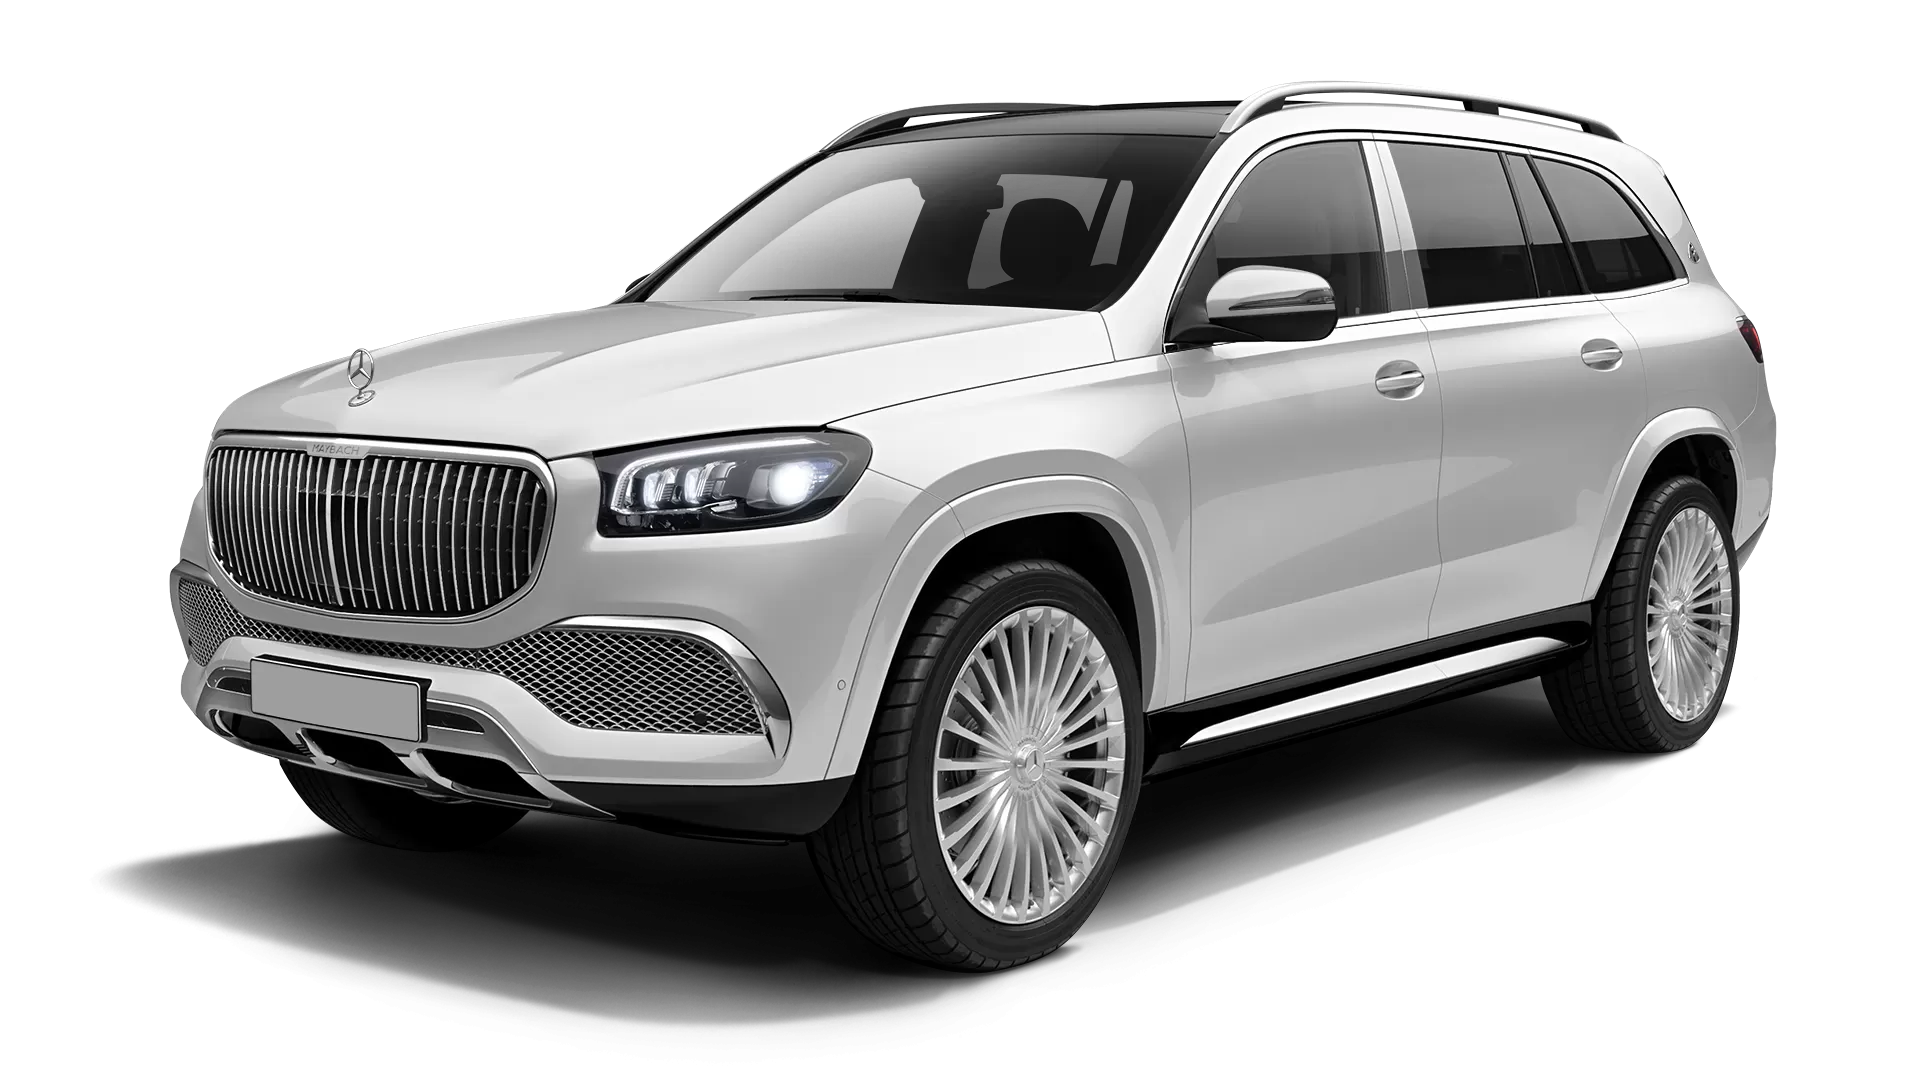 Mercedes Maybach GLS 600 stock front view in Diamond White color